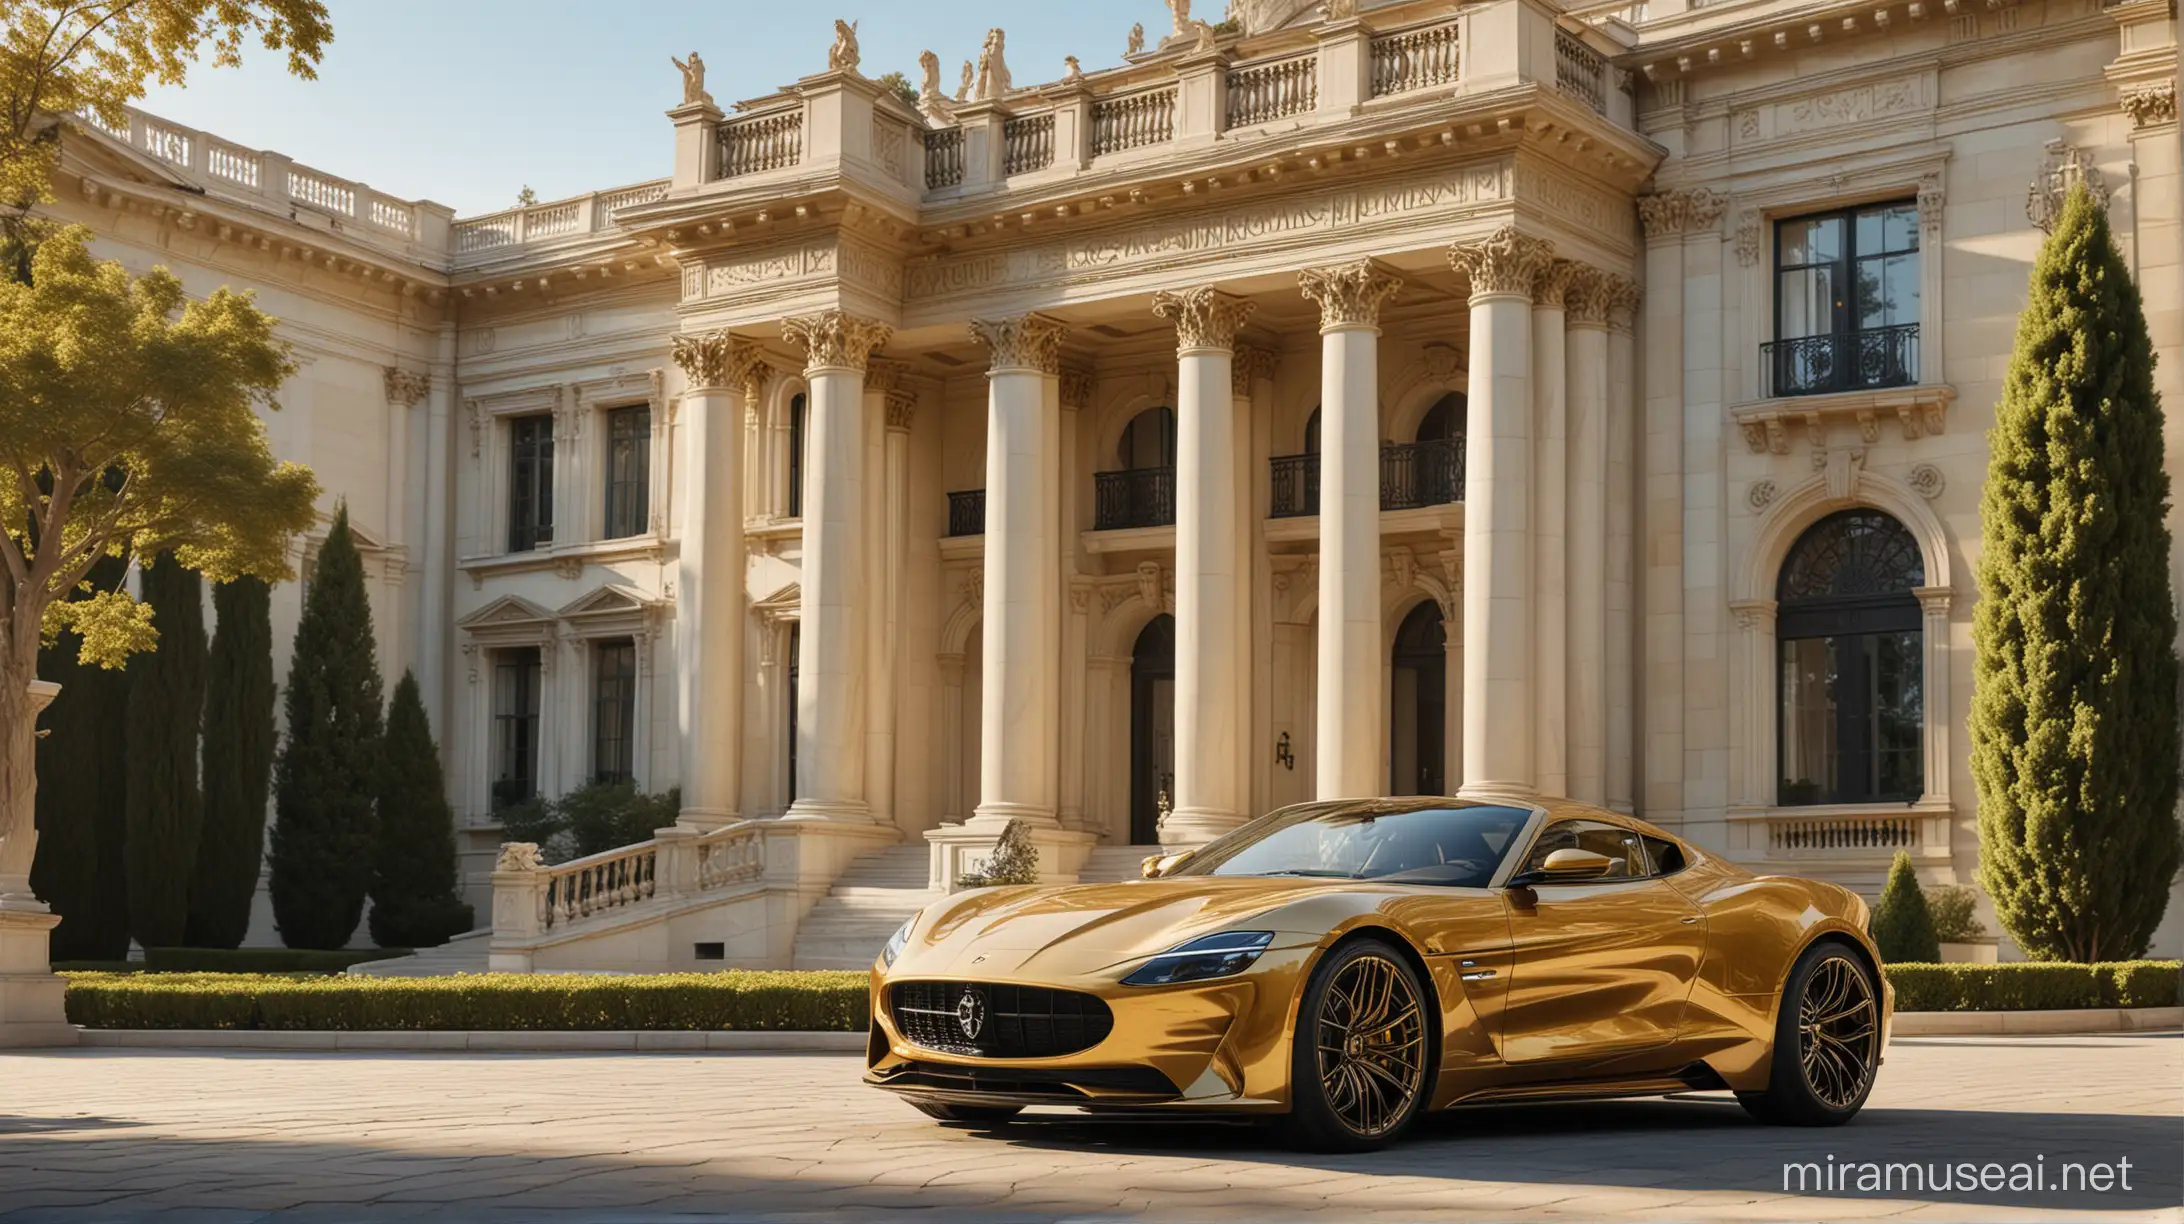 Luxurious Gold Sports Car Parked in Front of Opulent Mansion